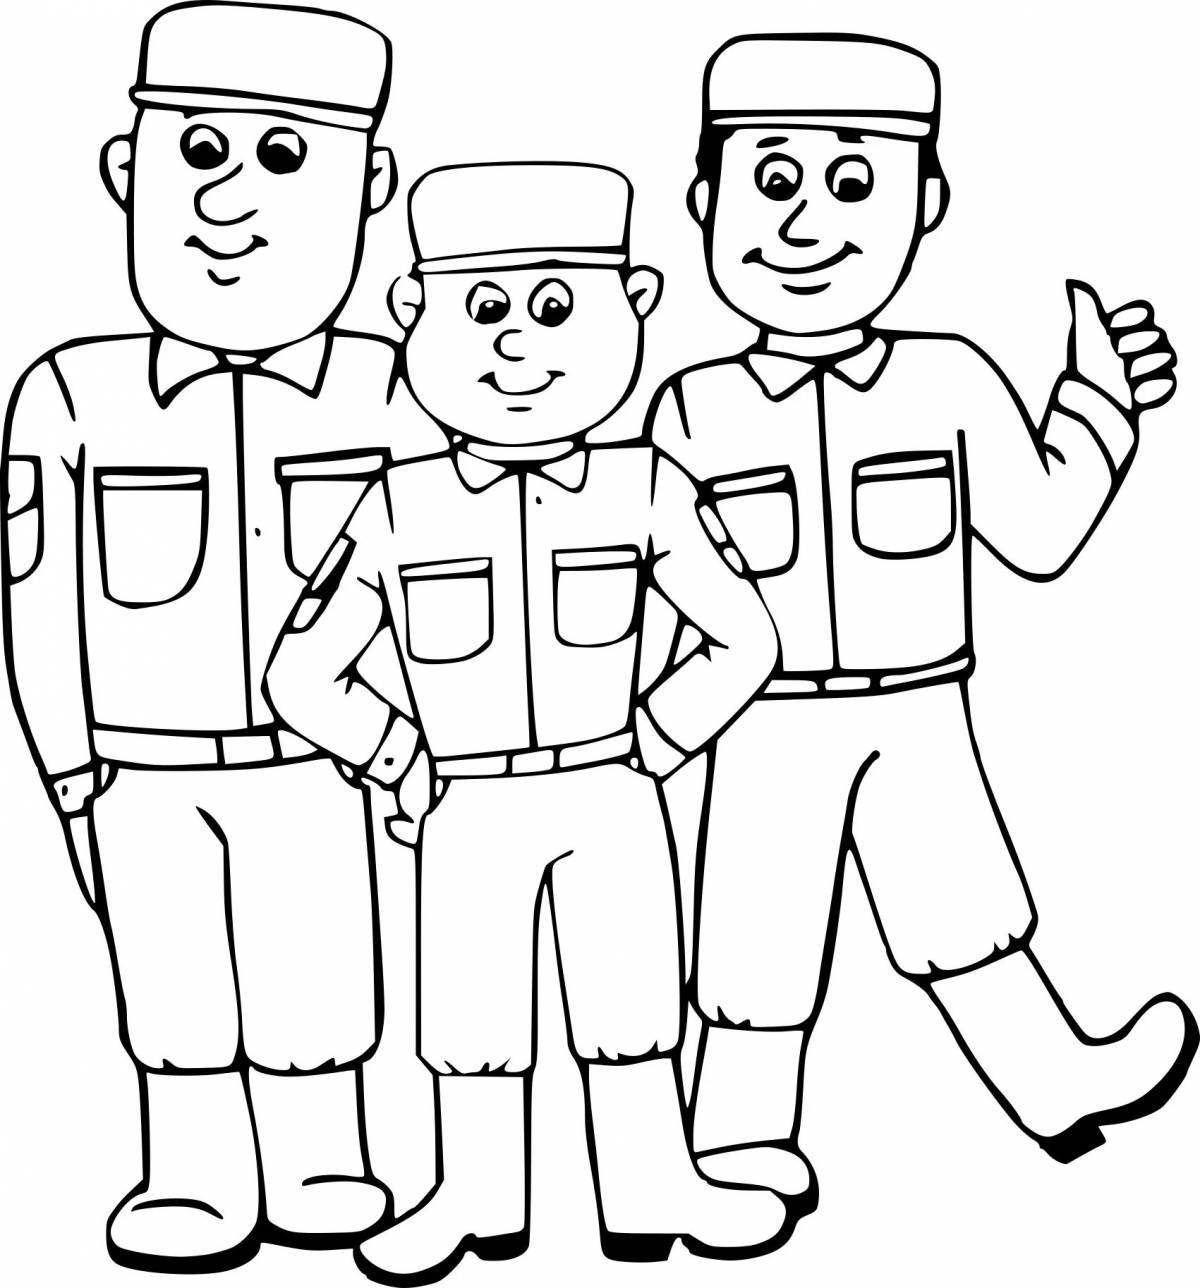 Impressive Russian soldier coloring book for kids